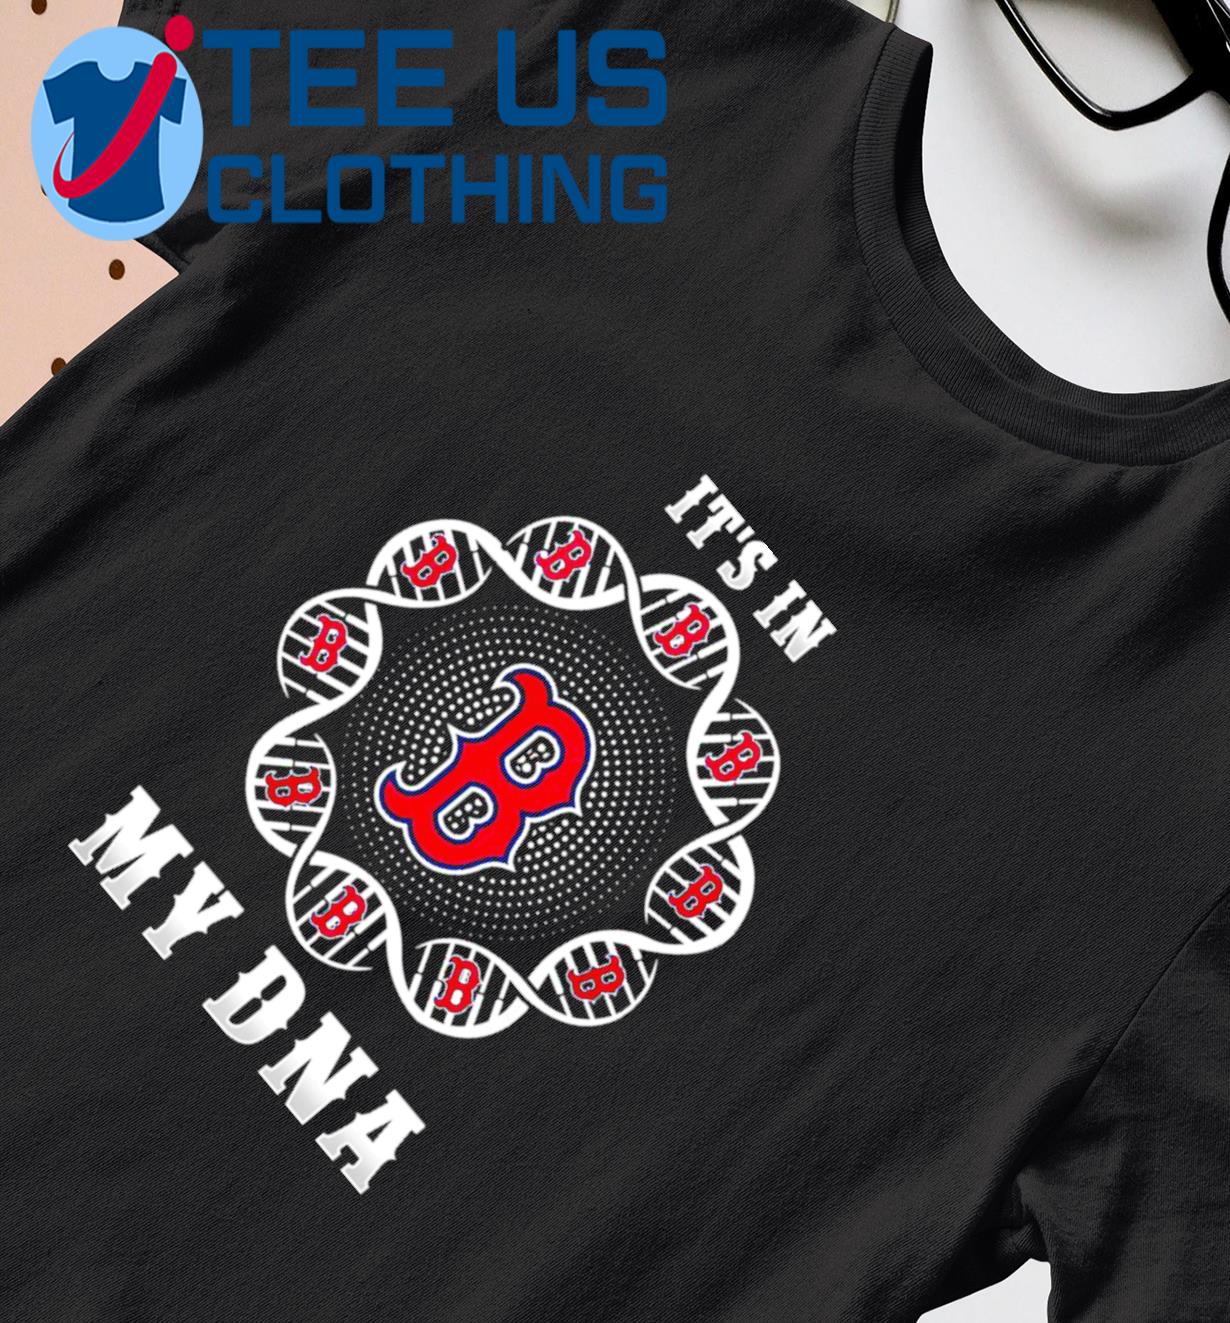 Official Boston red sox it's in my DNA 2023 T-shirt, hoodie, tank top,  sweater and long sleeve t-shirt